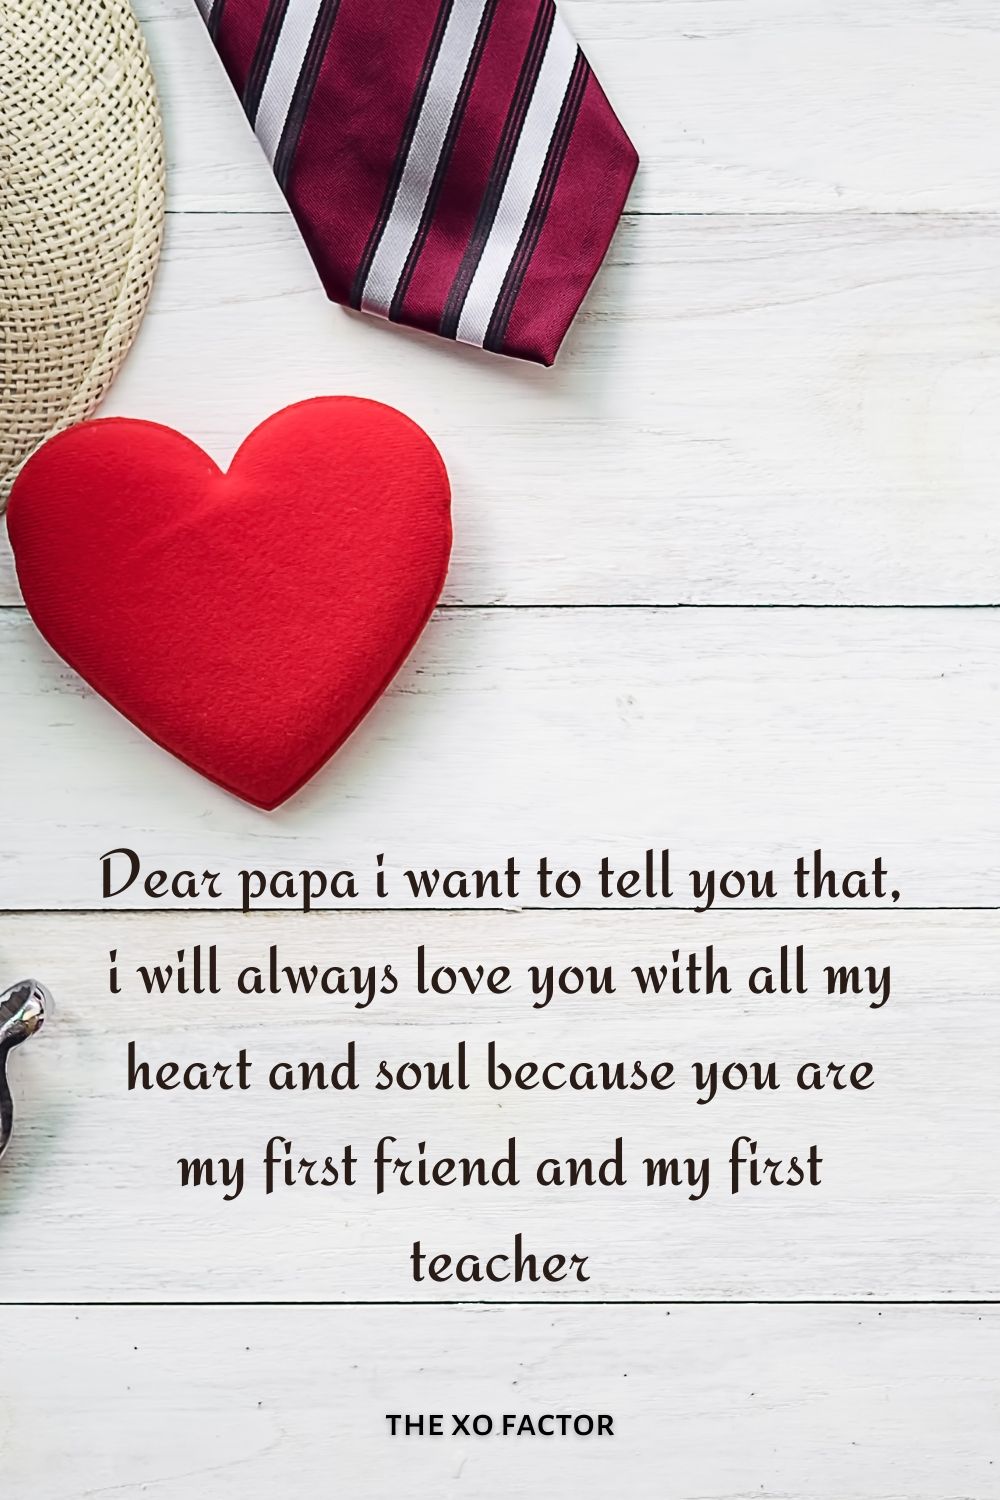 Dear papa i want to tell you that, i will always love you with all my heart and soul because you are my first friend and my first teacher